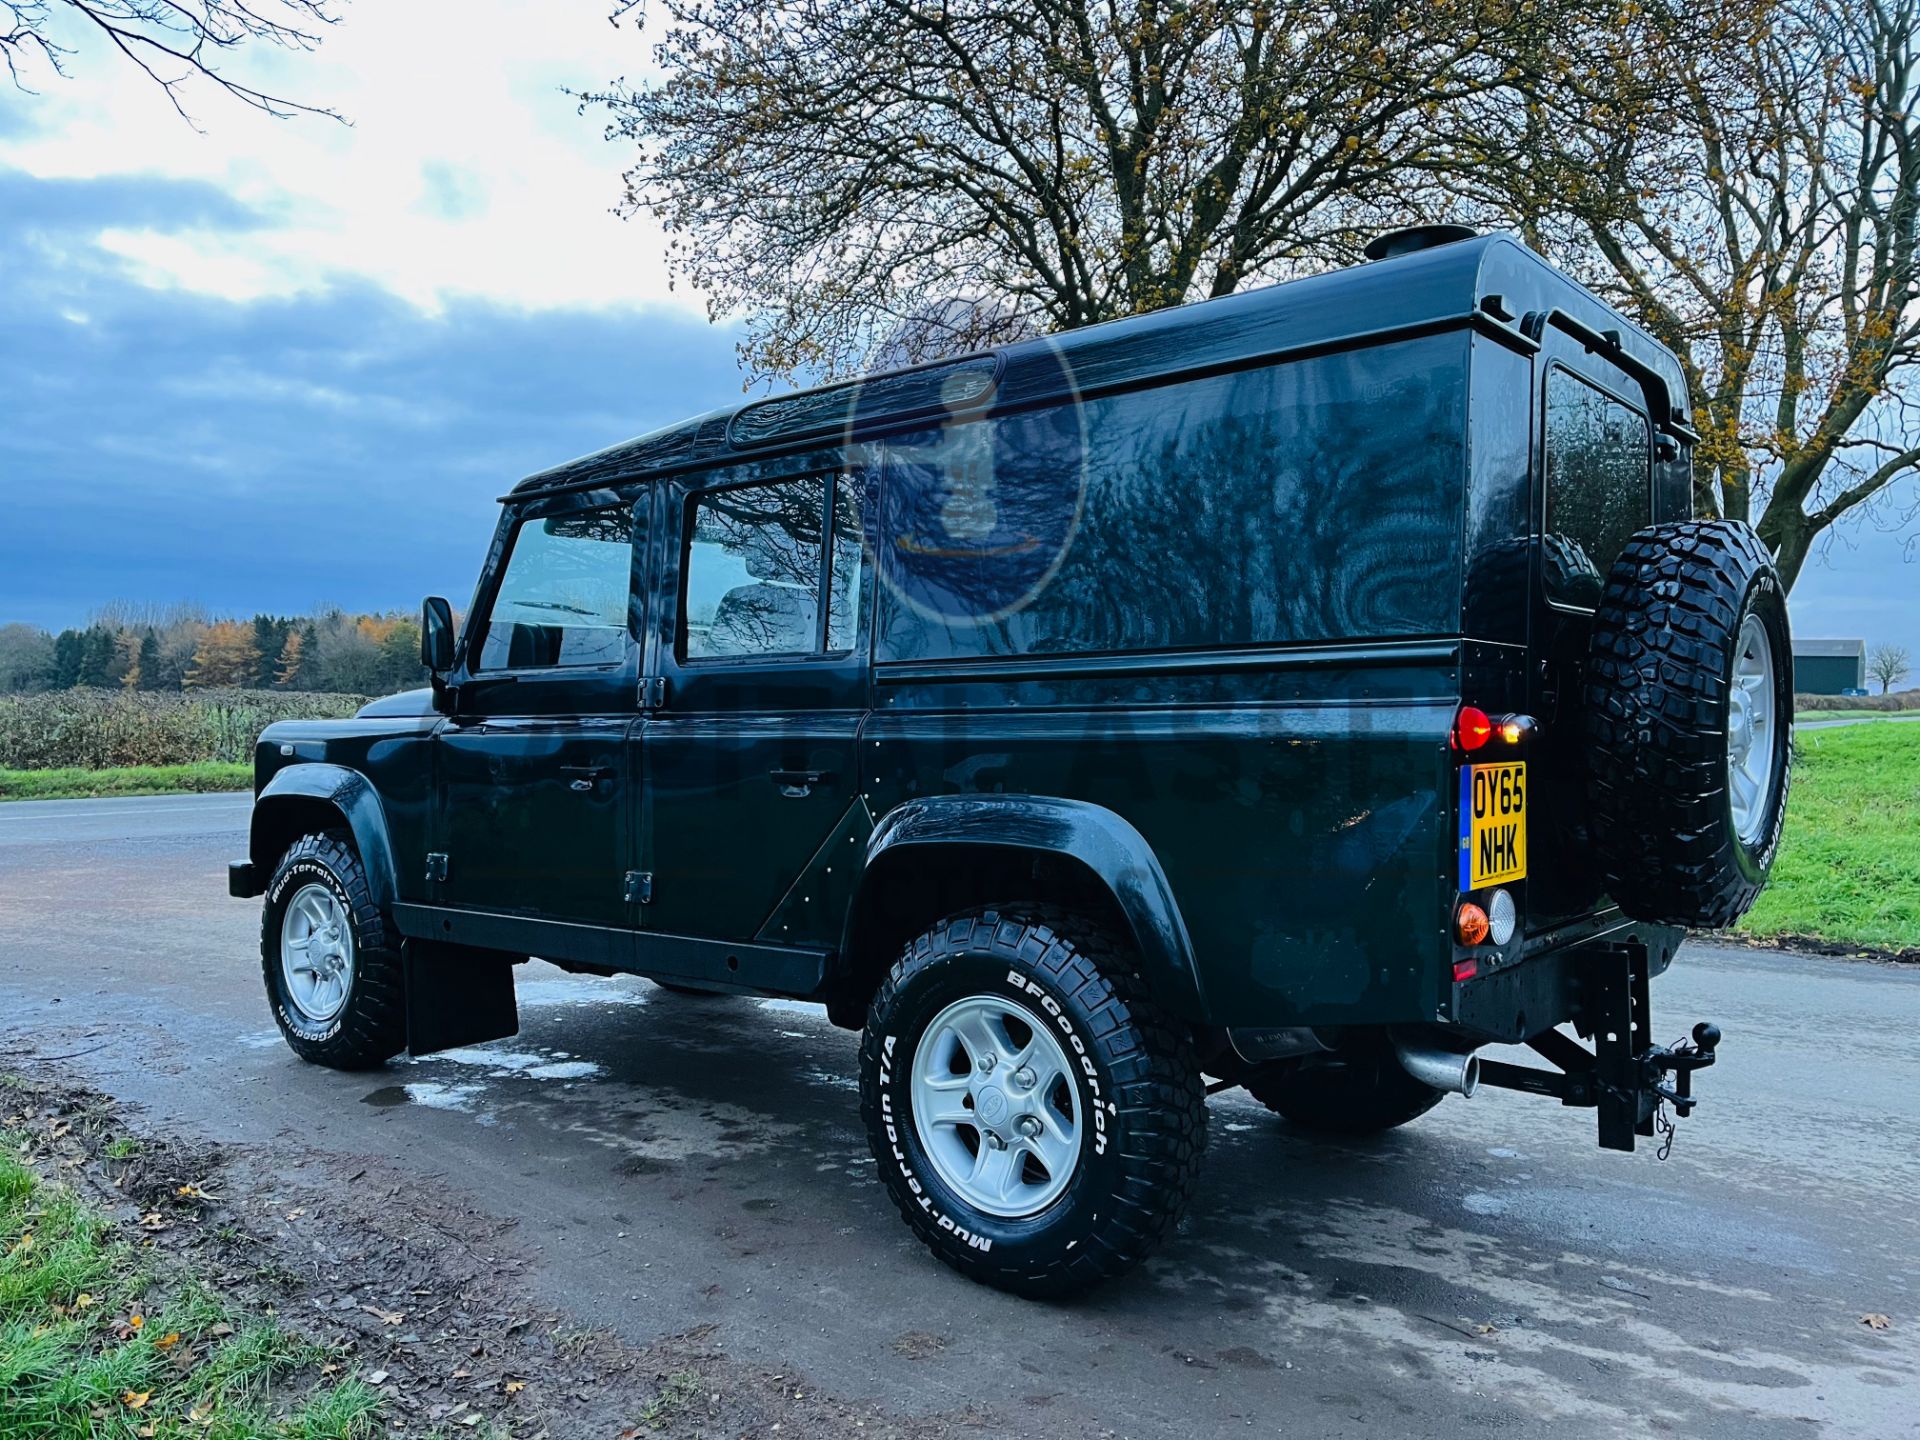 (ON SALE) LAND ROVER DEFENDER 110 *COUNTY-UTILITY WAGON* 2.2 TDCI (2016 MODEL) ONLY 37K MILES!! - Image 9 of 24